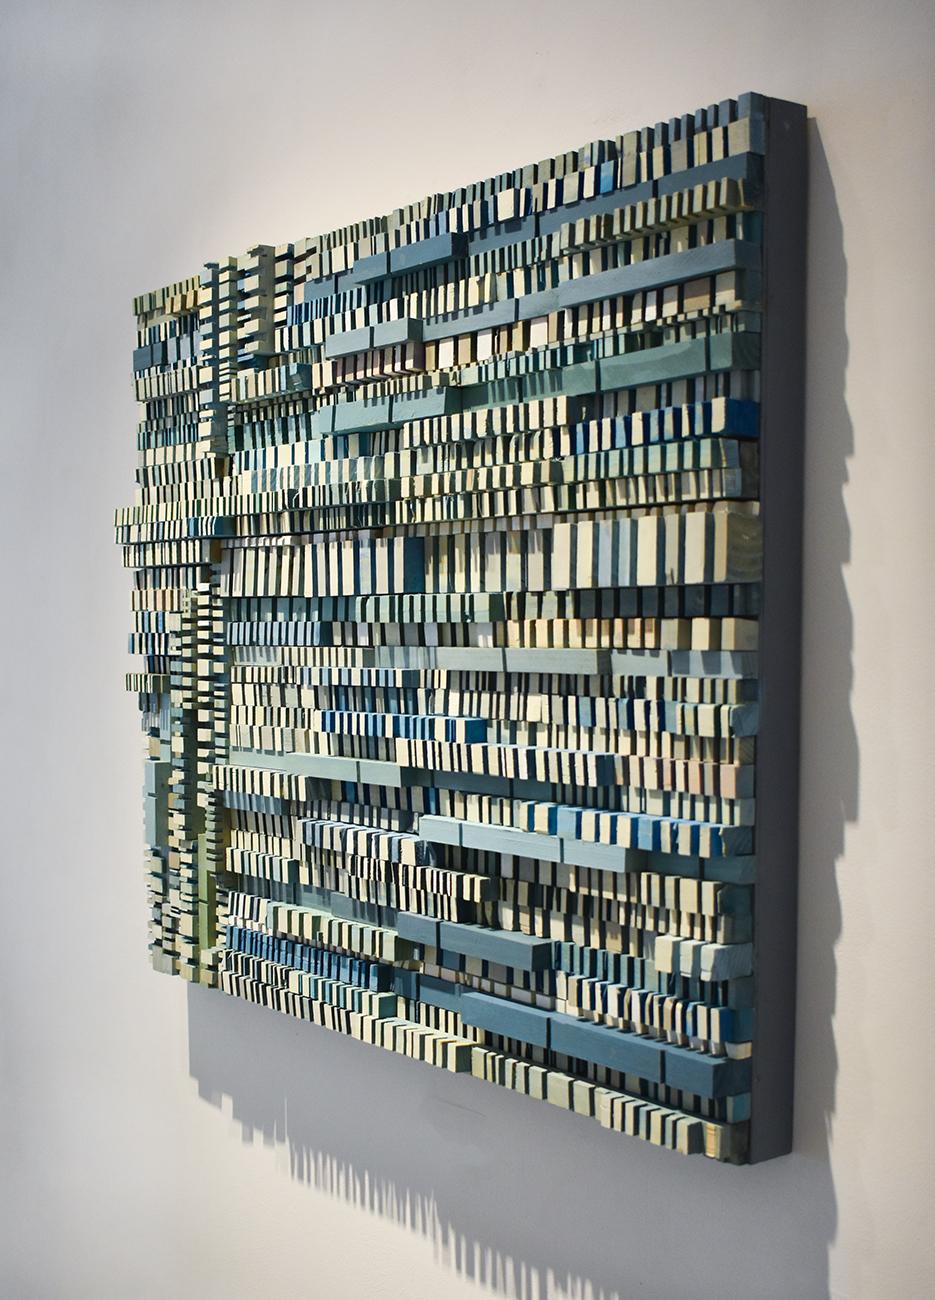 Abstract three-dimensional wall sculpture, acrylic and wood on panel 
Carved strips of wood dyed and painted in shades of light blue, teal, aqua, white and grey 
30 x 36 x 2.5 inches, can be oriented vertically or horizontally 
Art is wired with